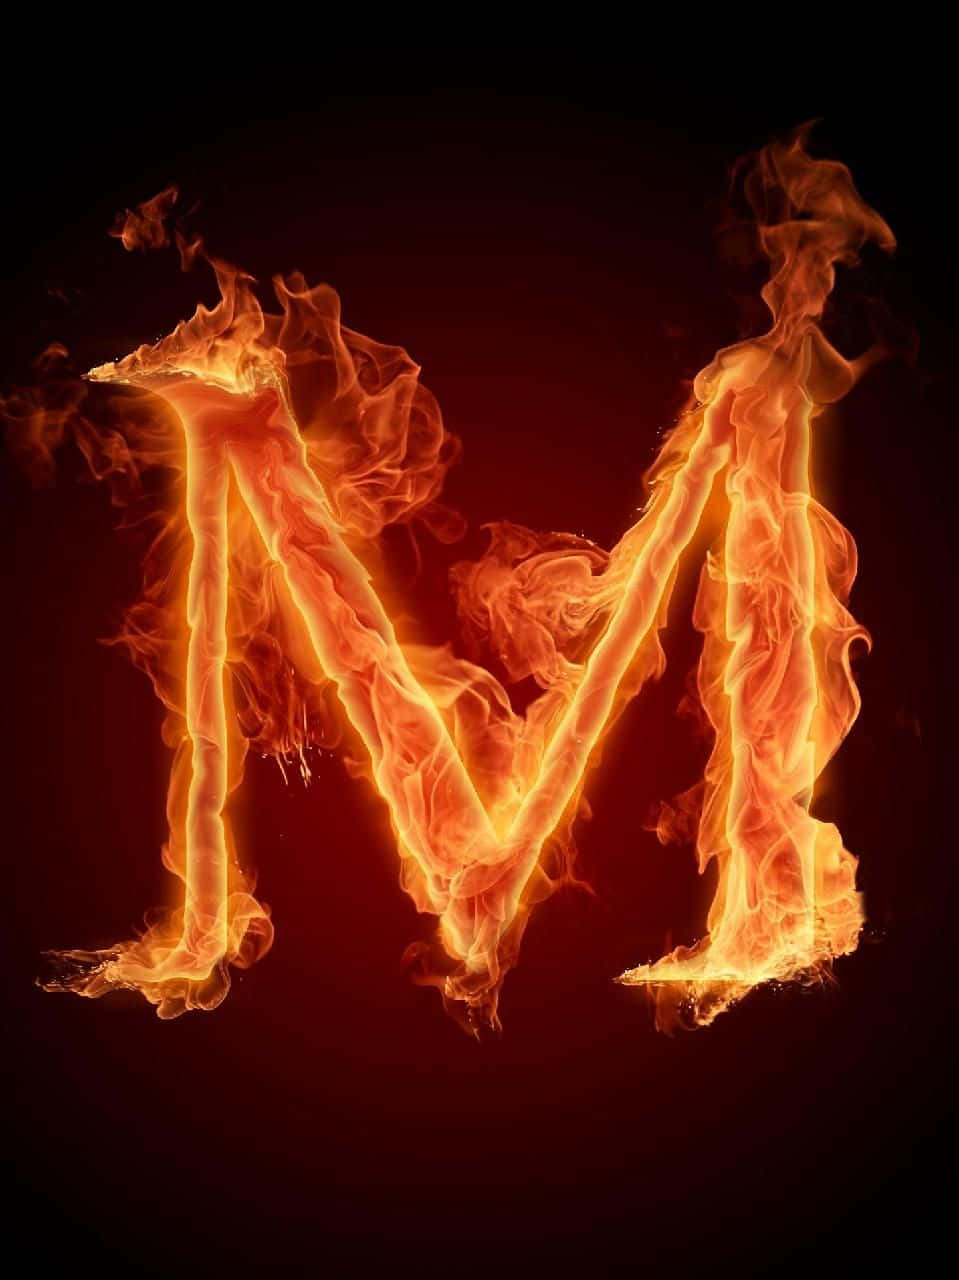 A Letter M Made Of Fire On A Black Background